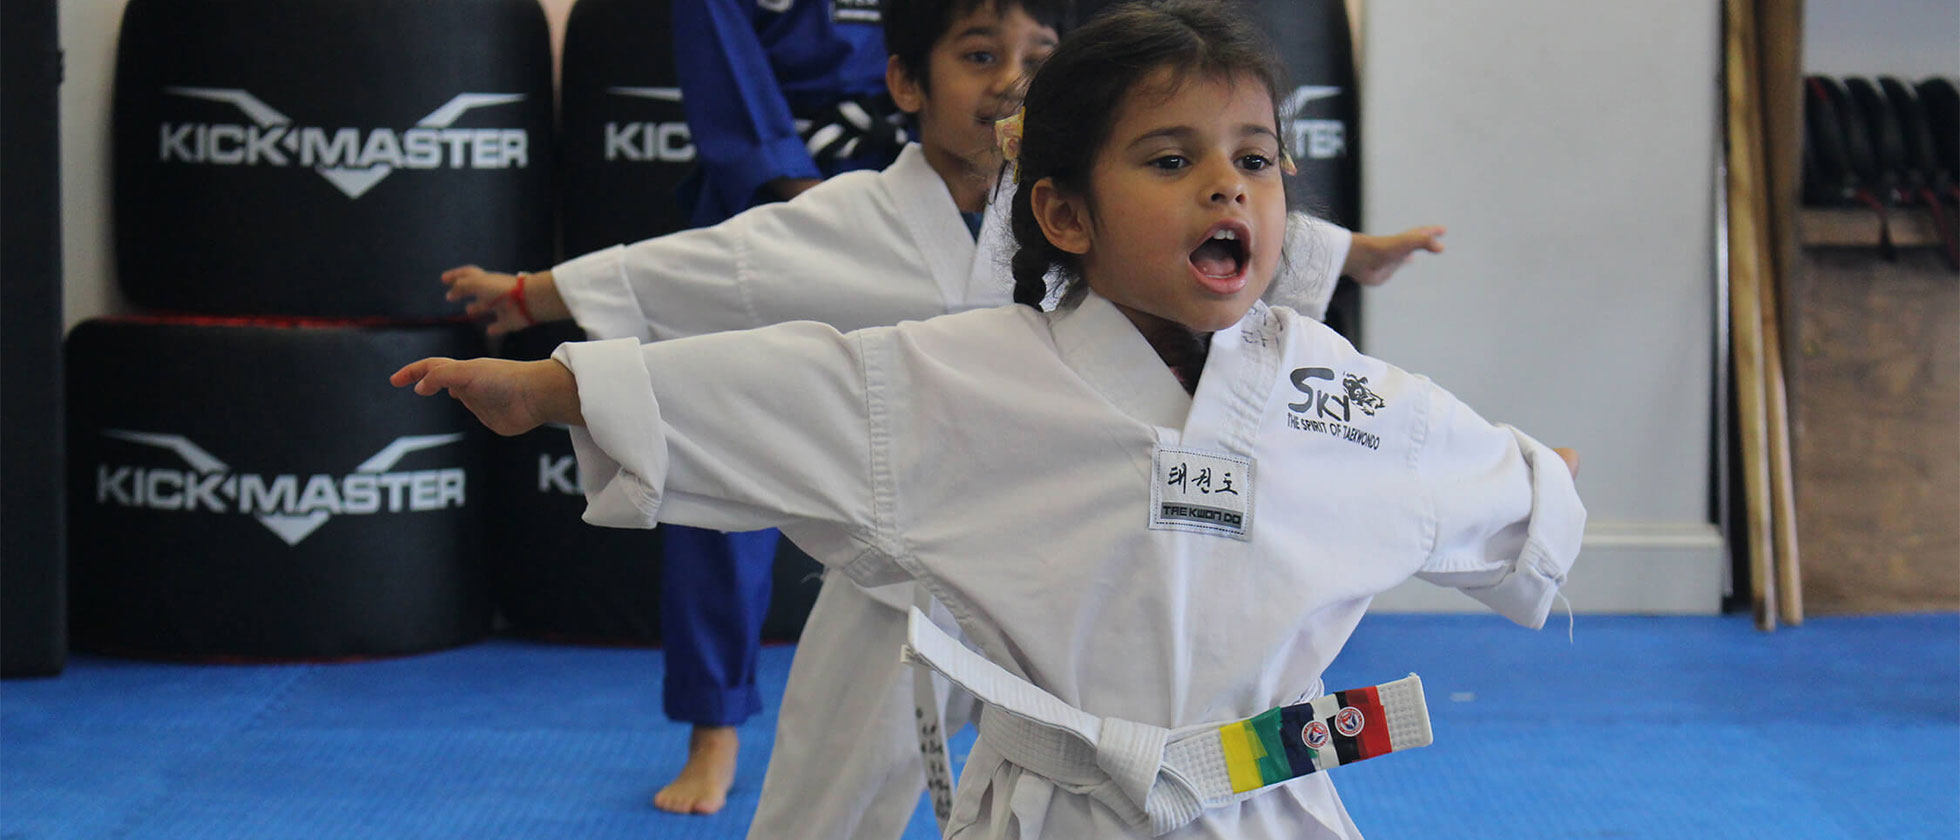 Kids Martial Arts In Warrington, Pennsylvania for Ages 3-5